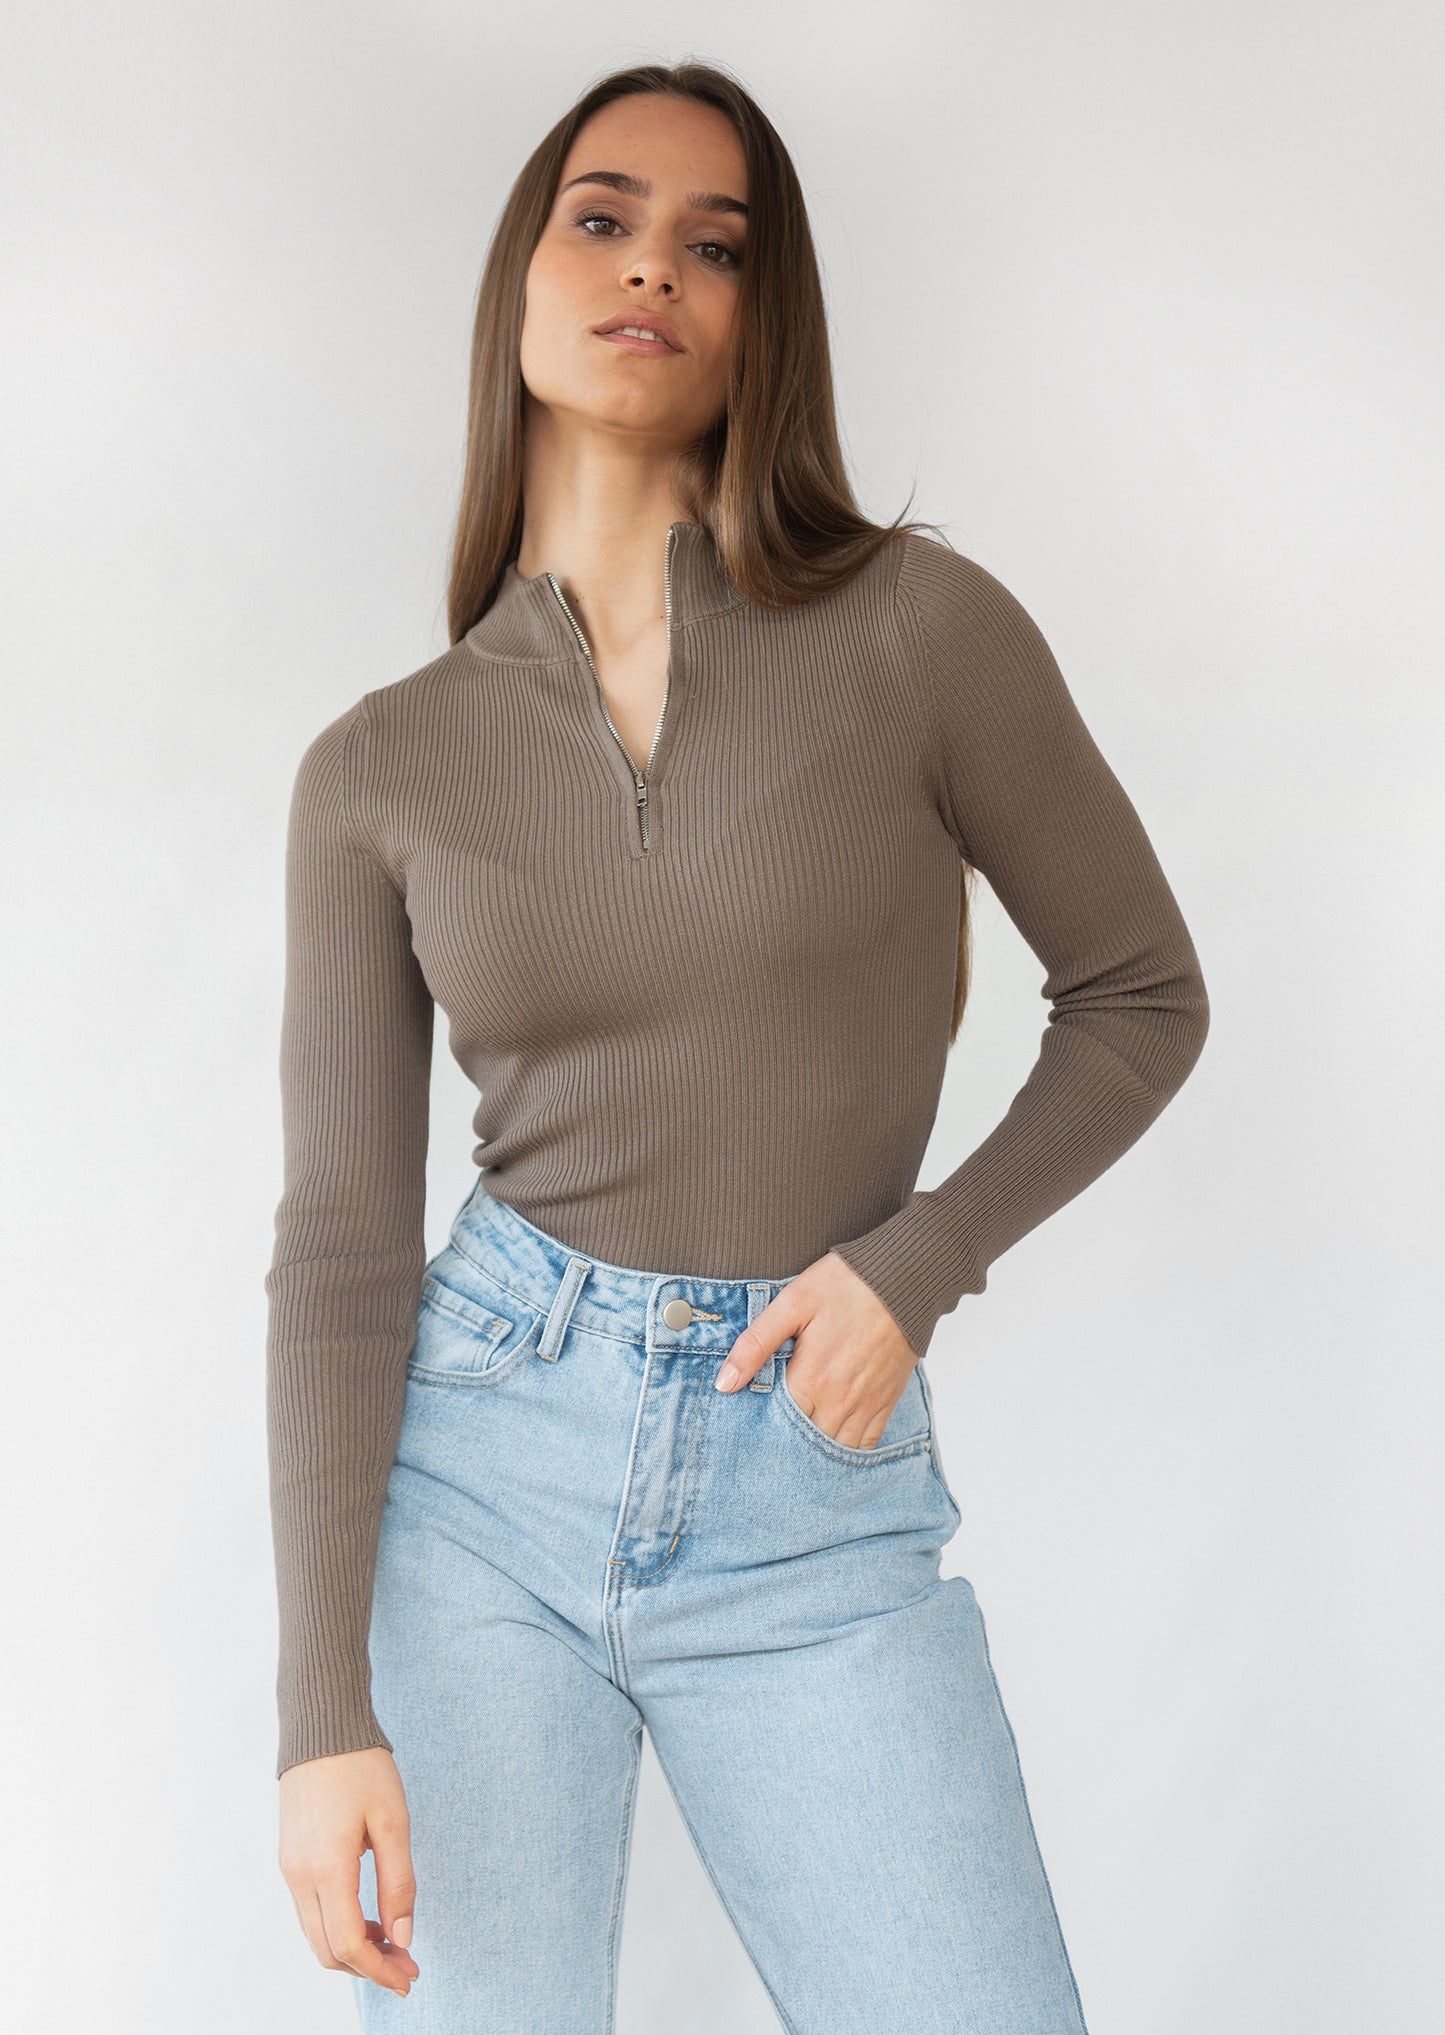 Ribbed half zip jumper in taupe